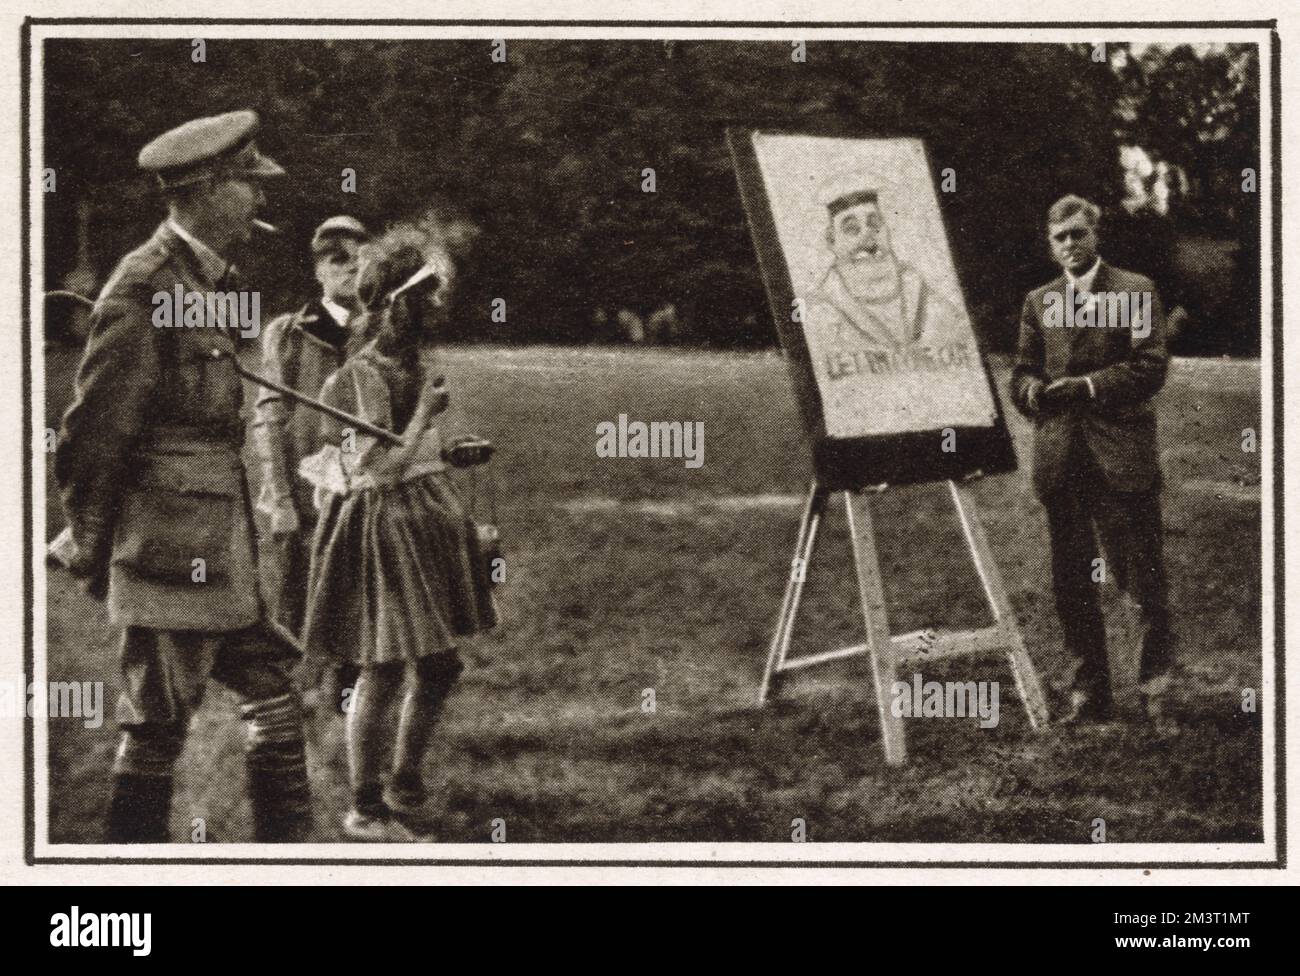 The artist John Hassall pictured sketching at a Red Cross fundraising event in Kidbrooke Park, London in 1918. To the left is Major Devitt who organised the sports for men of the Royal Field Artillery. Hassall carried out a huge amount of work for free during the Great War, and regularly made appearances at hospitals and fundraisers where he would make humorous sketches which were often auctioned.     Date: 1918 Stock Photo